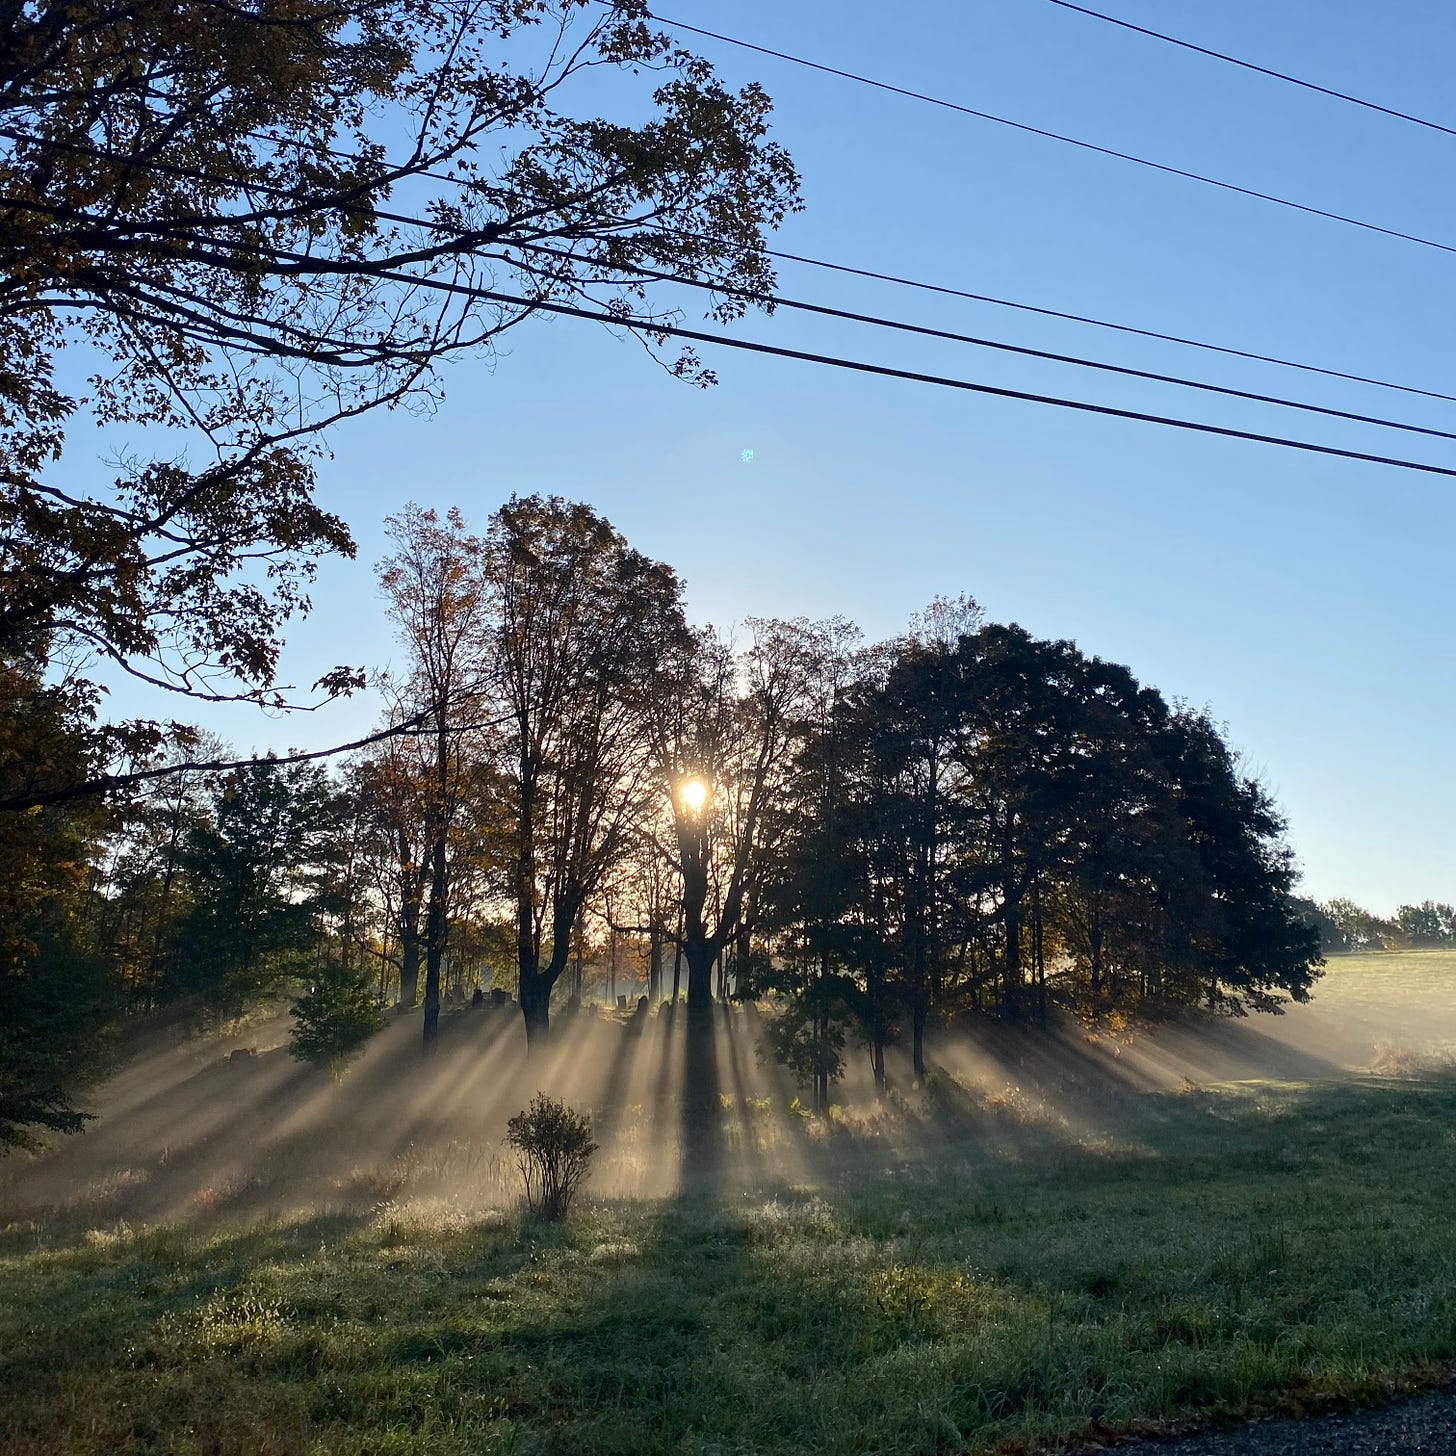 The bright sun behind a stand of dark trees. The pasture in front of the trees is misty and pale; the long dark tree shadows stripe eerily across the mist, gently backlit by the sun.